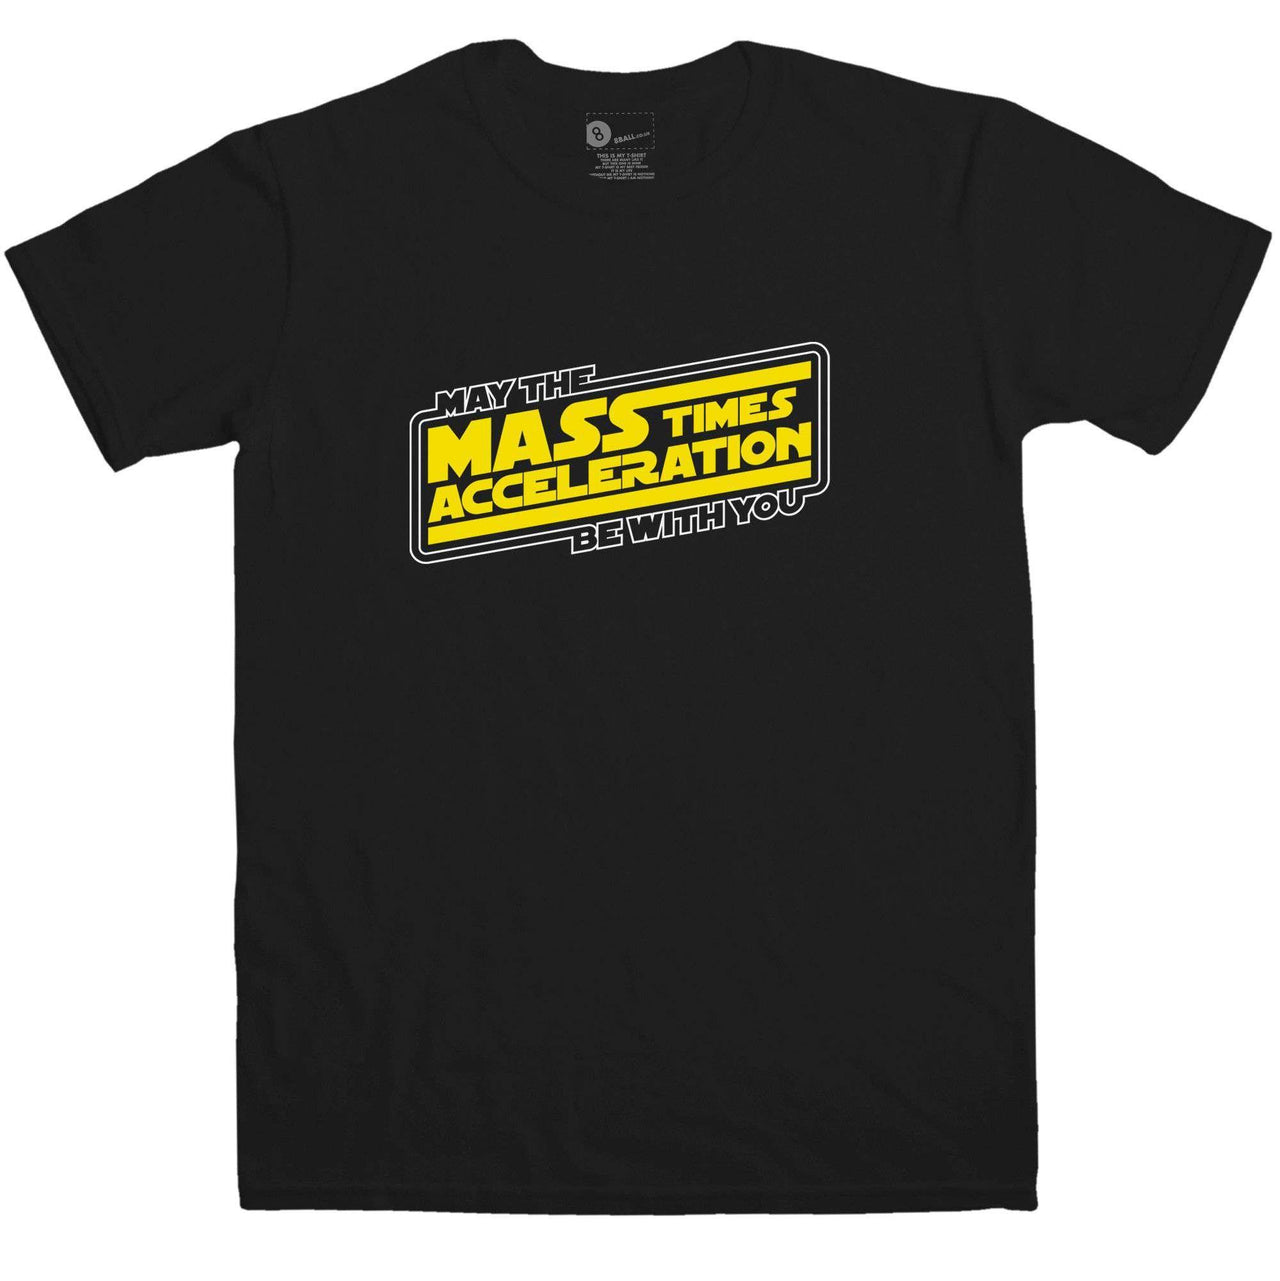 May The Mass Times Acceleration Be With You Mens Graphic T-Shirt 8Ball